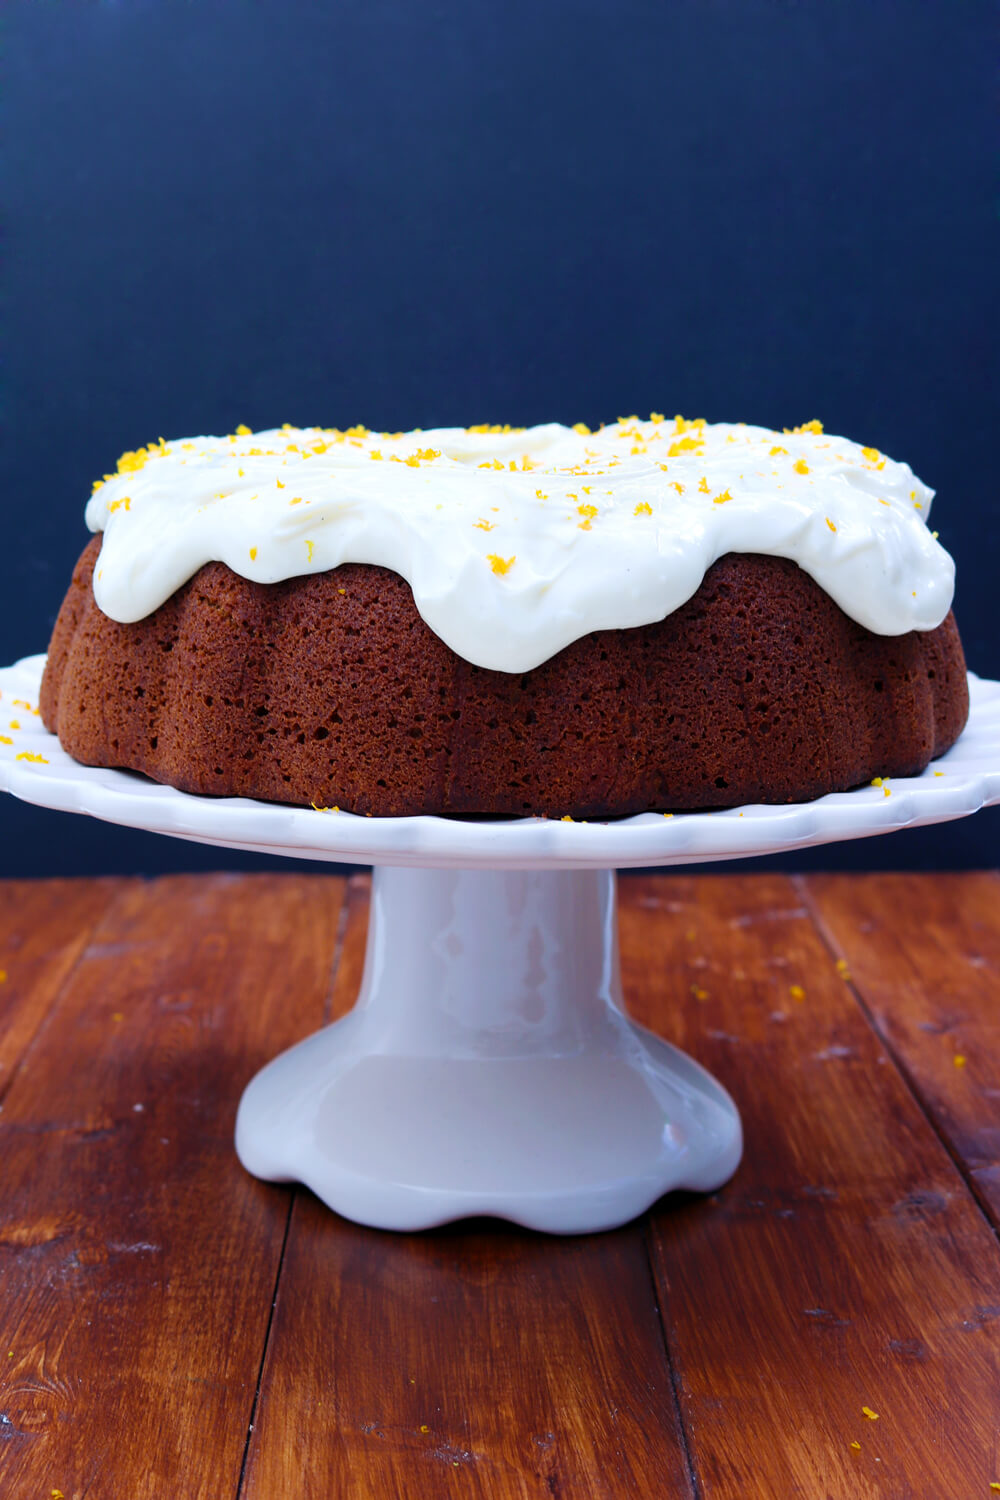 Carrot Bundt Cake with a Cheesecake Filling | Take Some Whisks